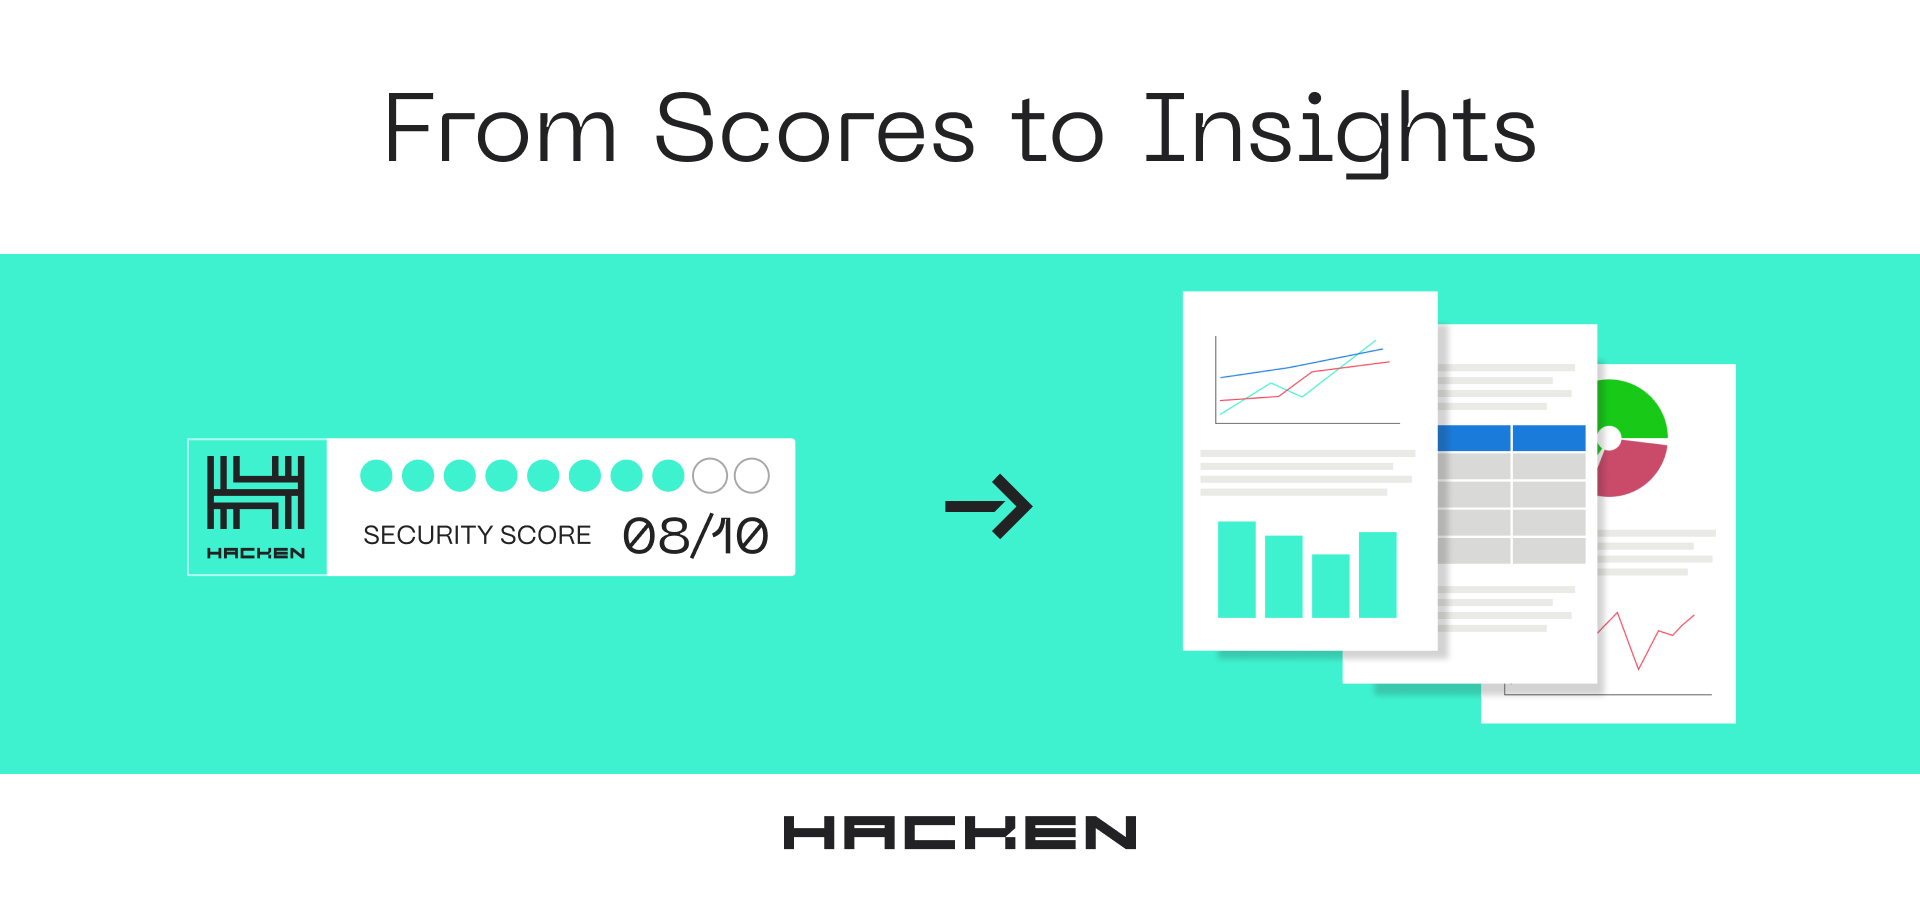 From Scores to Insights